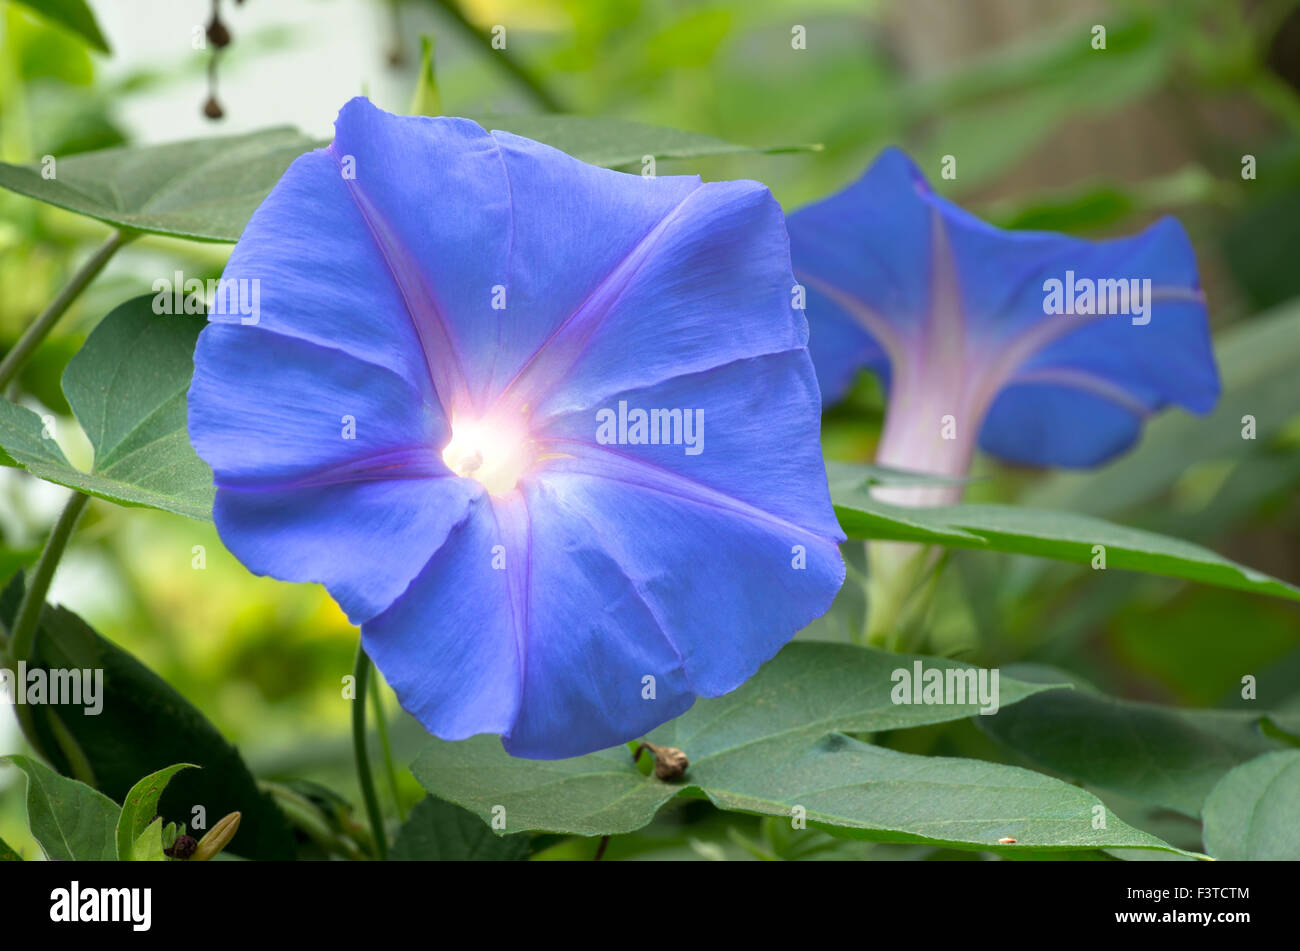 morning glory or ipomoea purpurea flower in full bloom and foliage Stock Photo